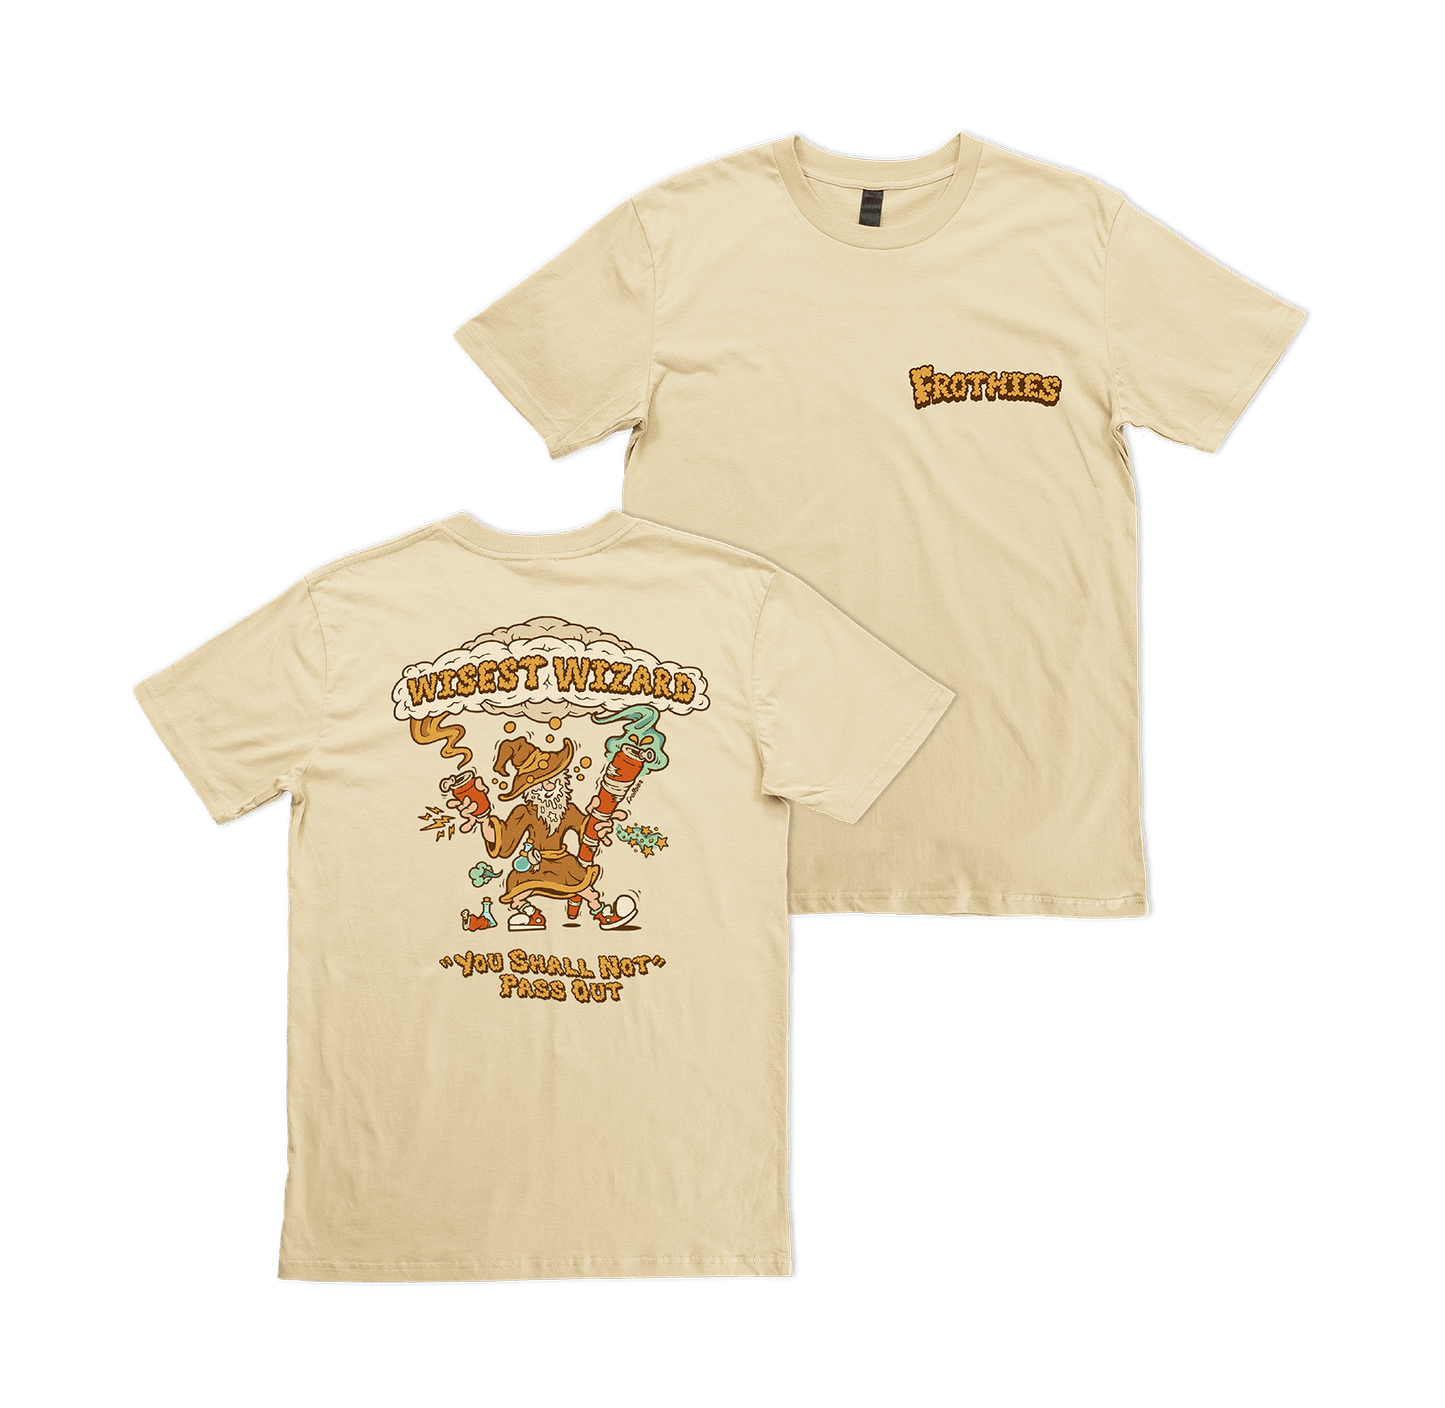 Wisest Wizard Tee T-Shirt Frothies